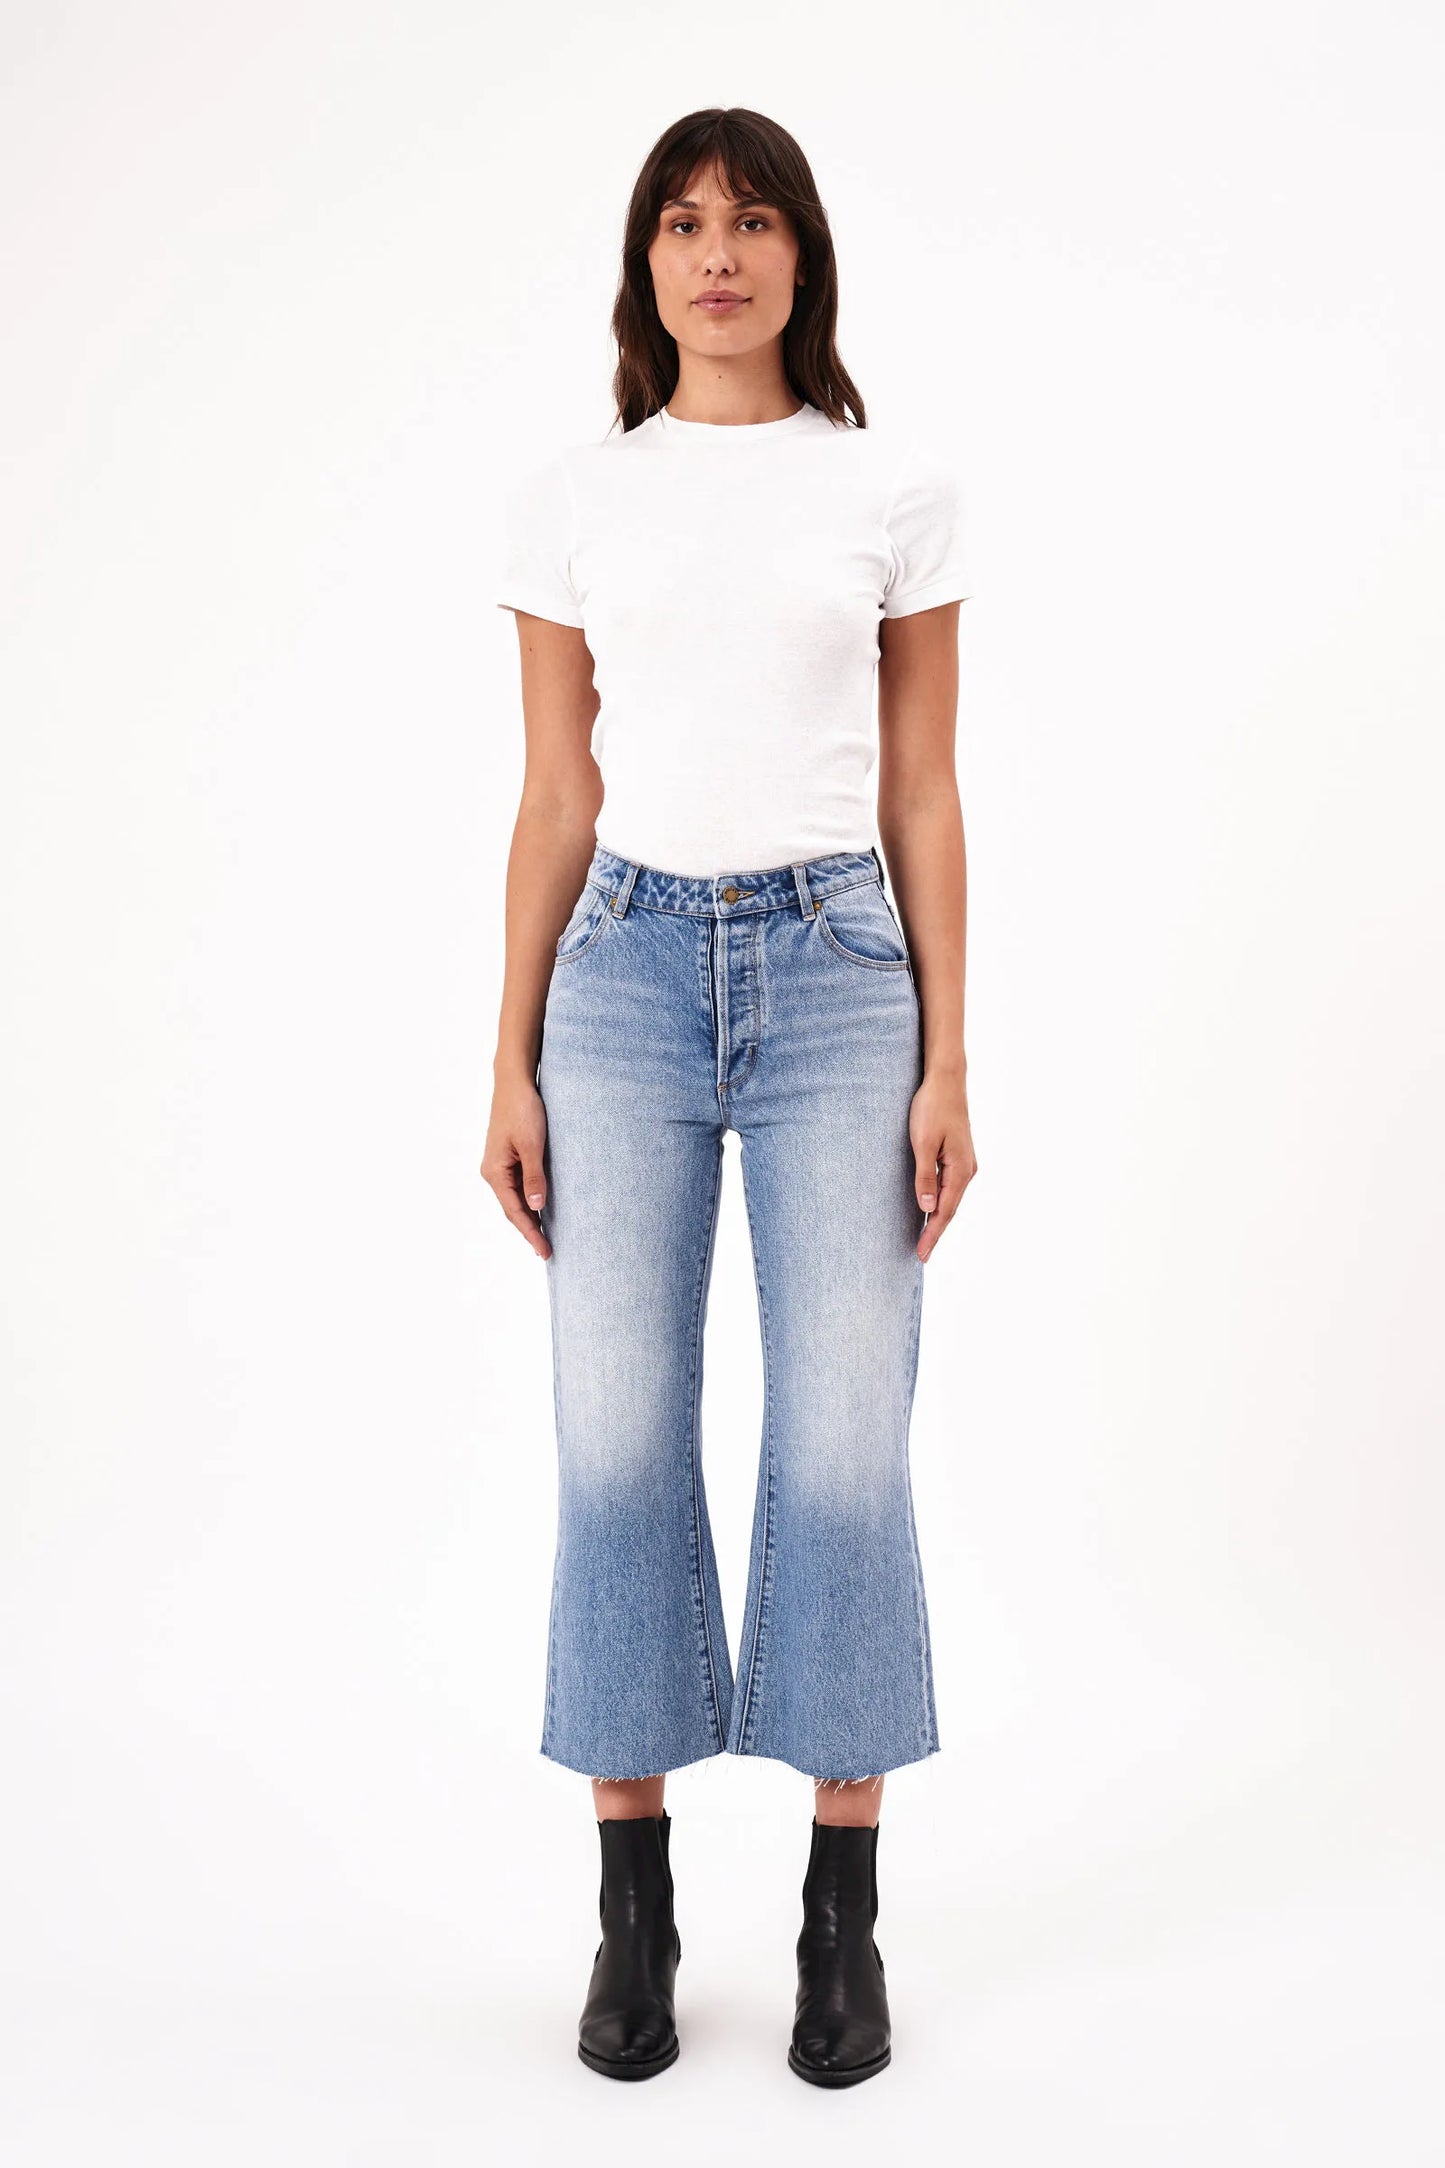 Rolla's Classic Flare Crop Jeans Chloe Vintage Blue